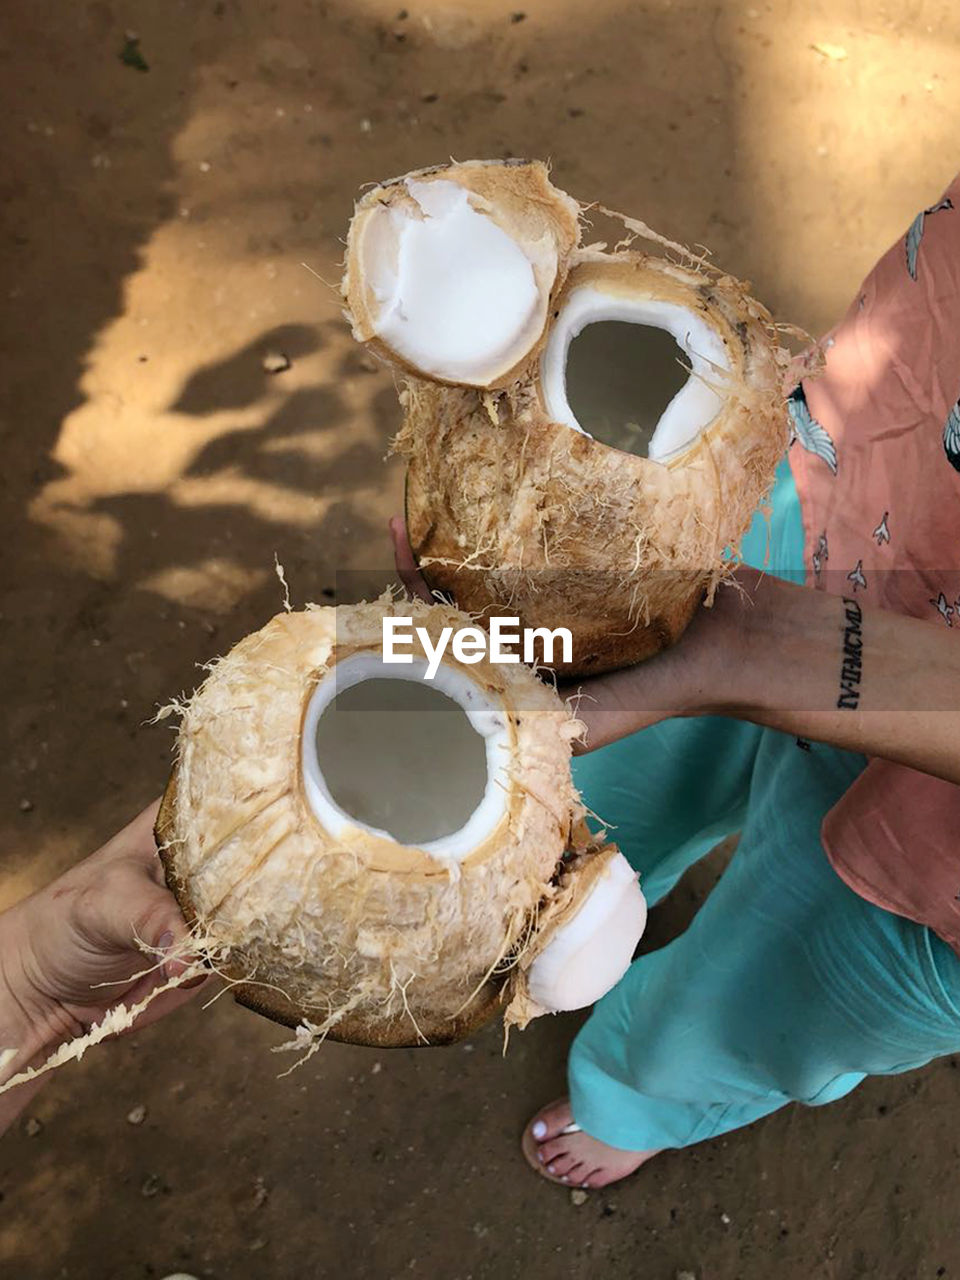 Two people holding open fresh coconuts in theo hands in a sand floor